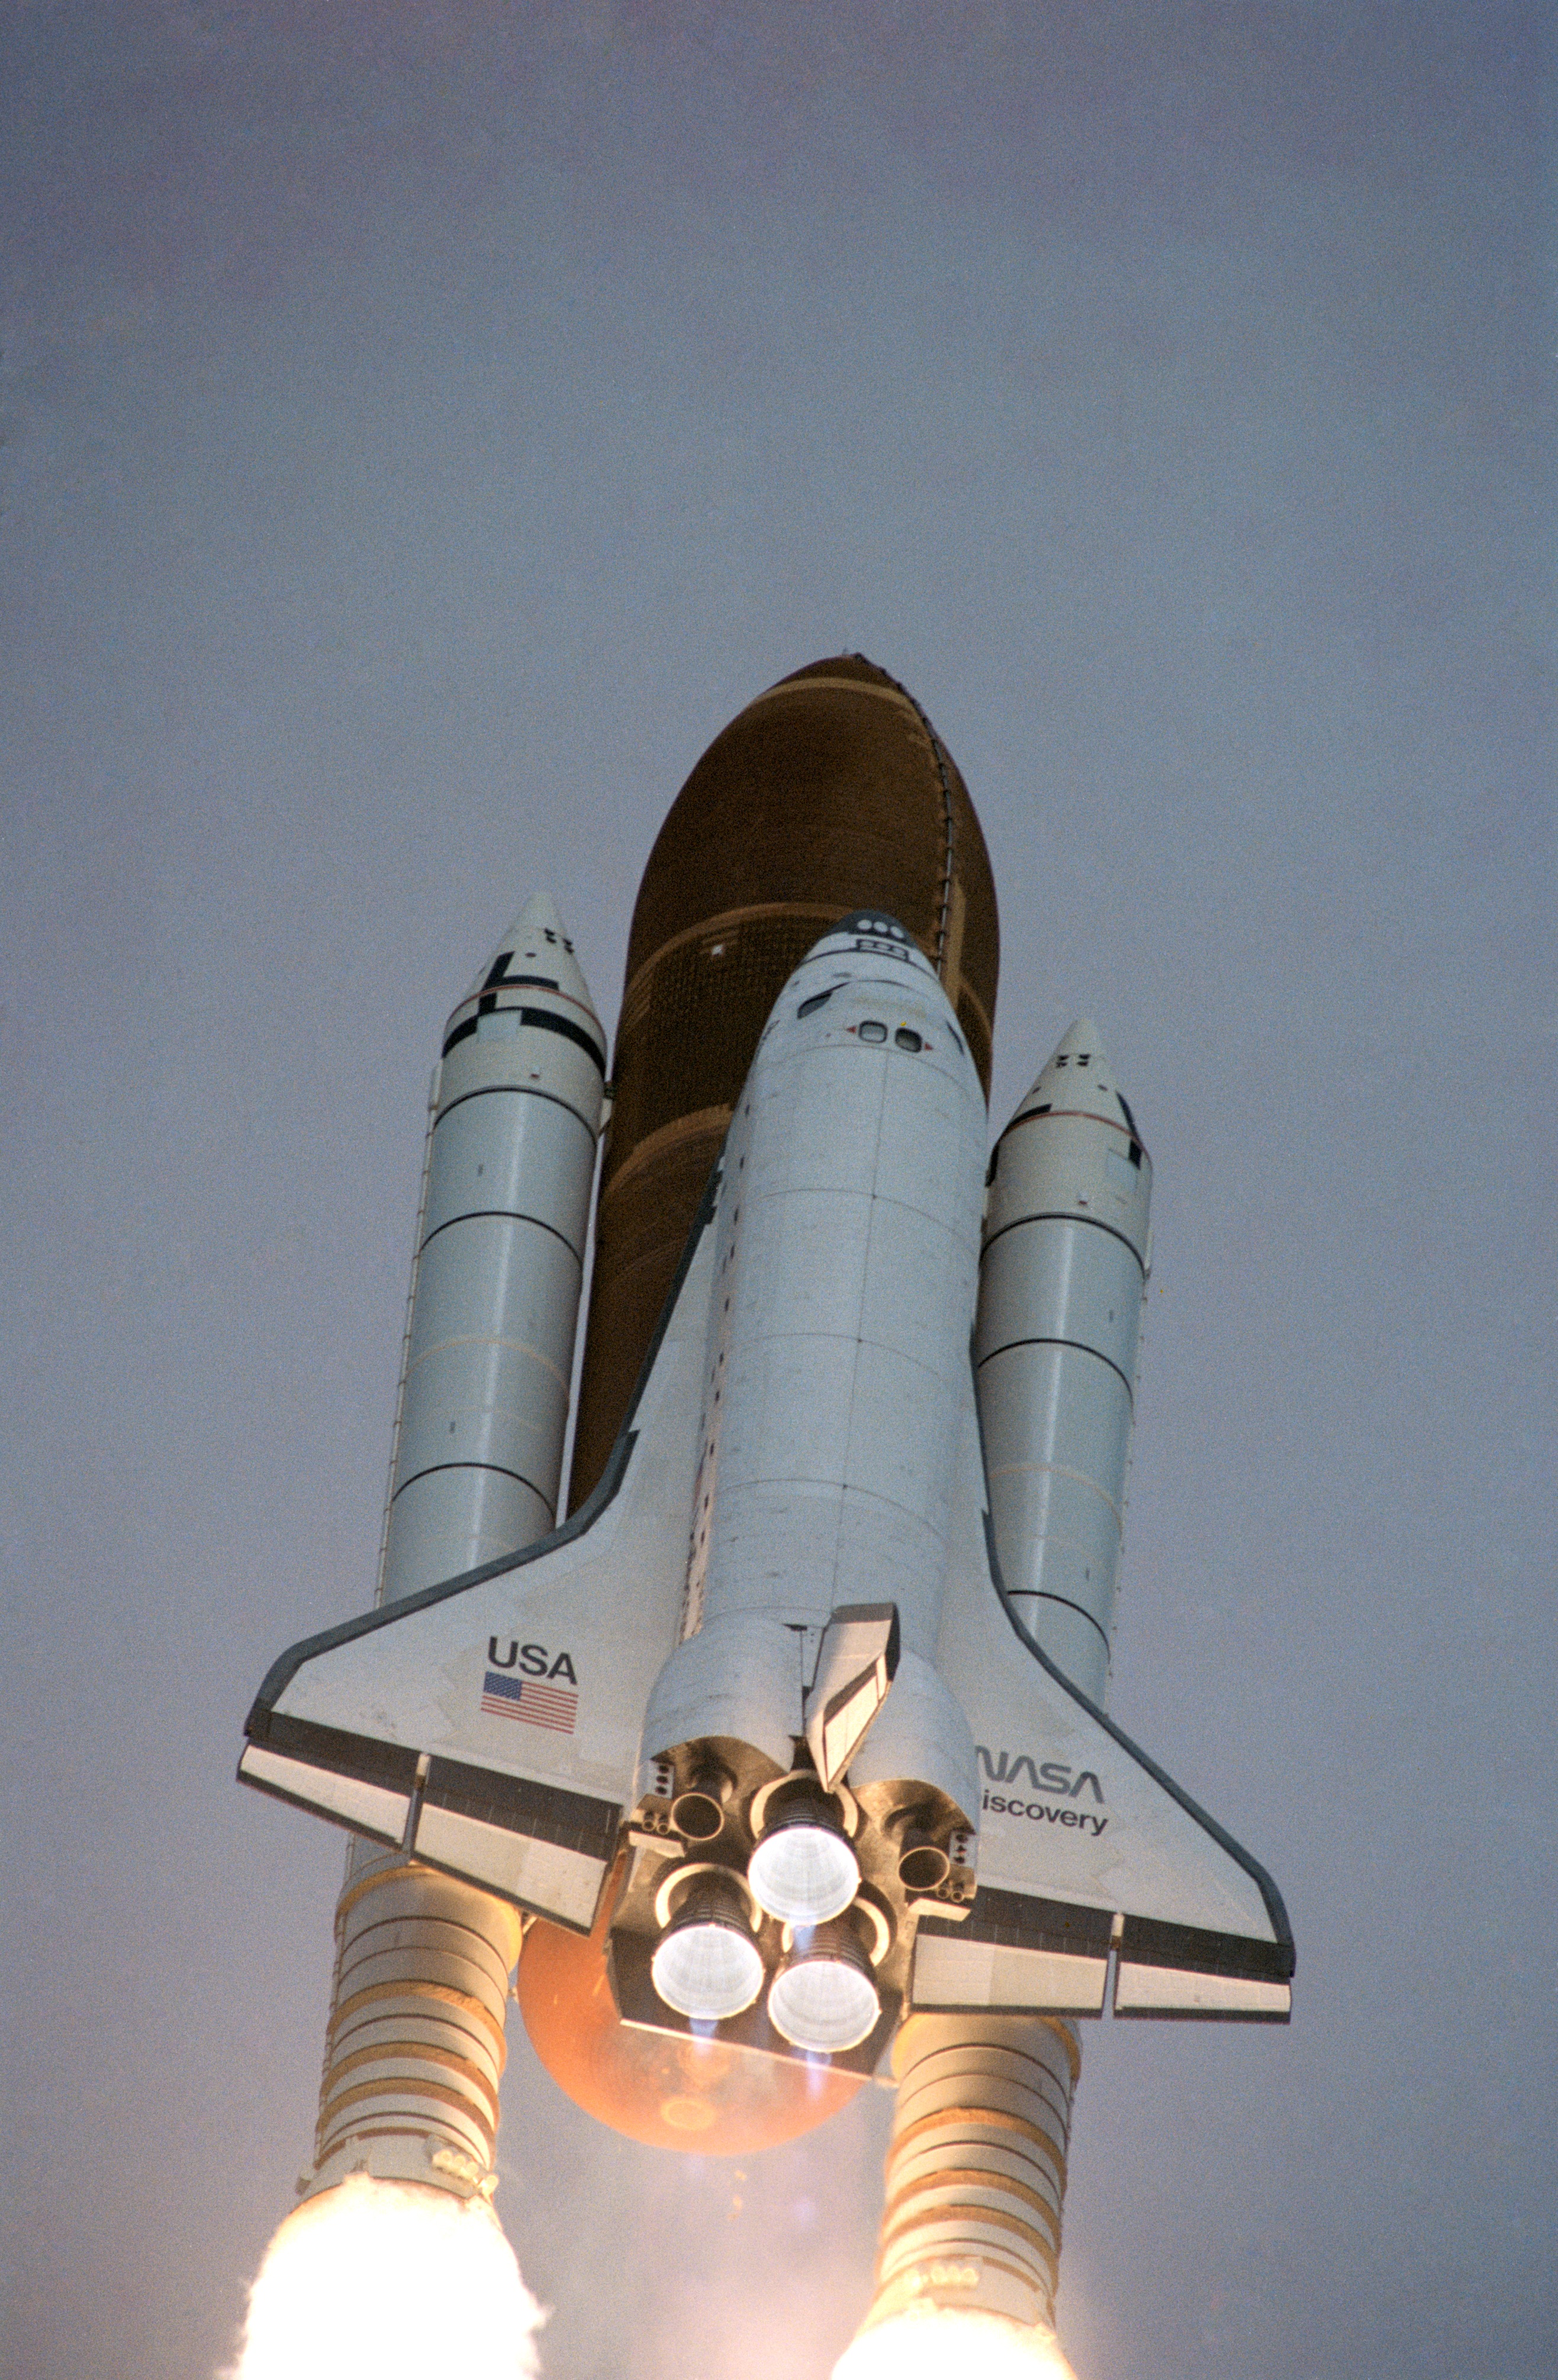 Looking up at the space shuttle Discovery as it climbs toward space.